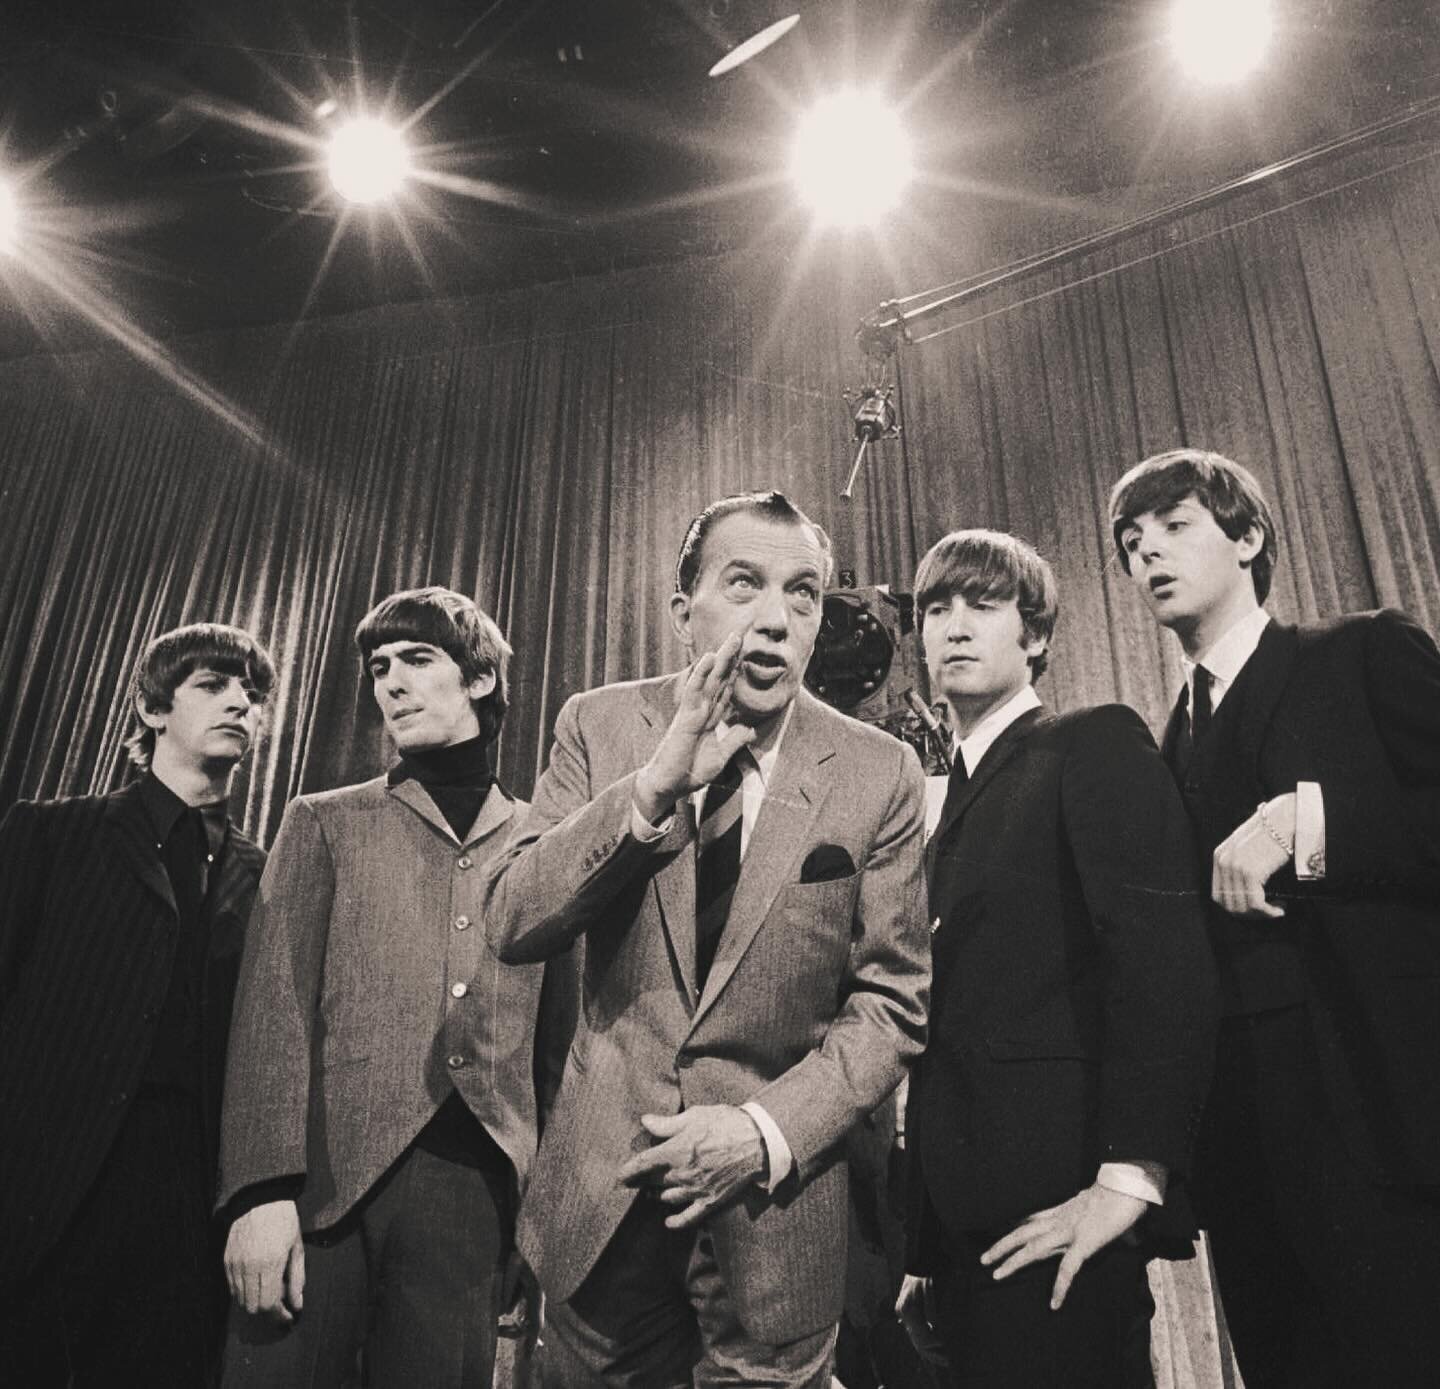 We watched the #beatles on the television at the neighbors house 60 years ago. Our fathers played cribbage on the brick stairwell outside while our mothers squealed with delight. #edsullivan #edsullivanshow #pauljohngeorgeringo everyone loved #ringo 